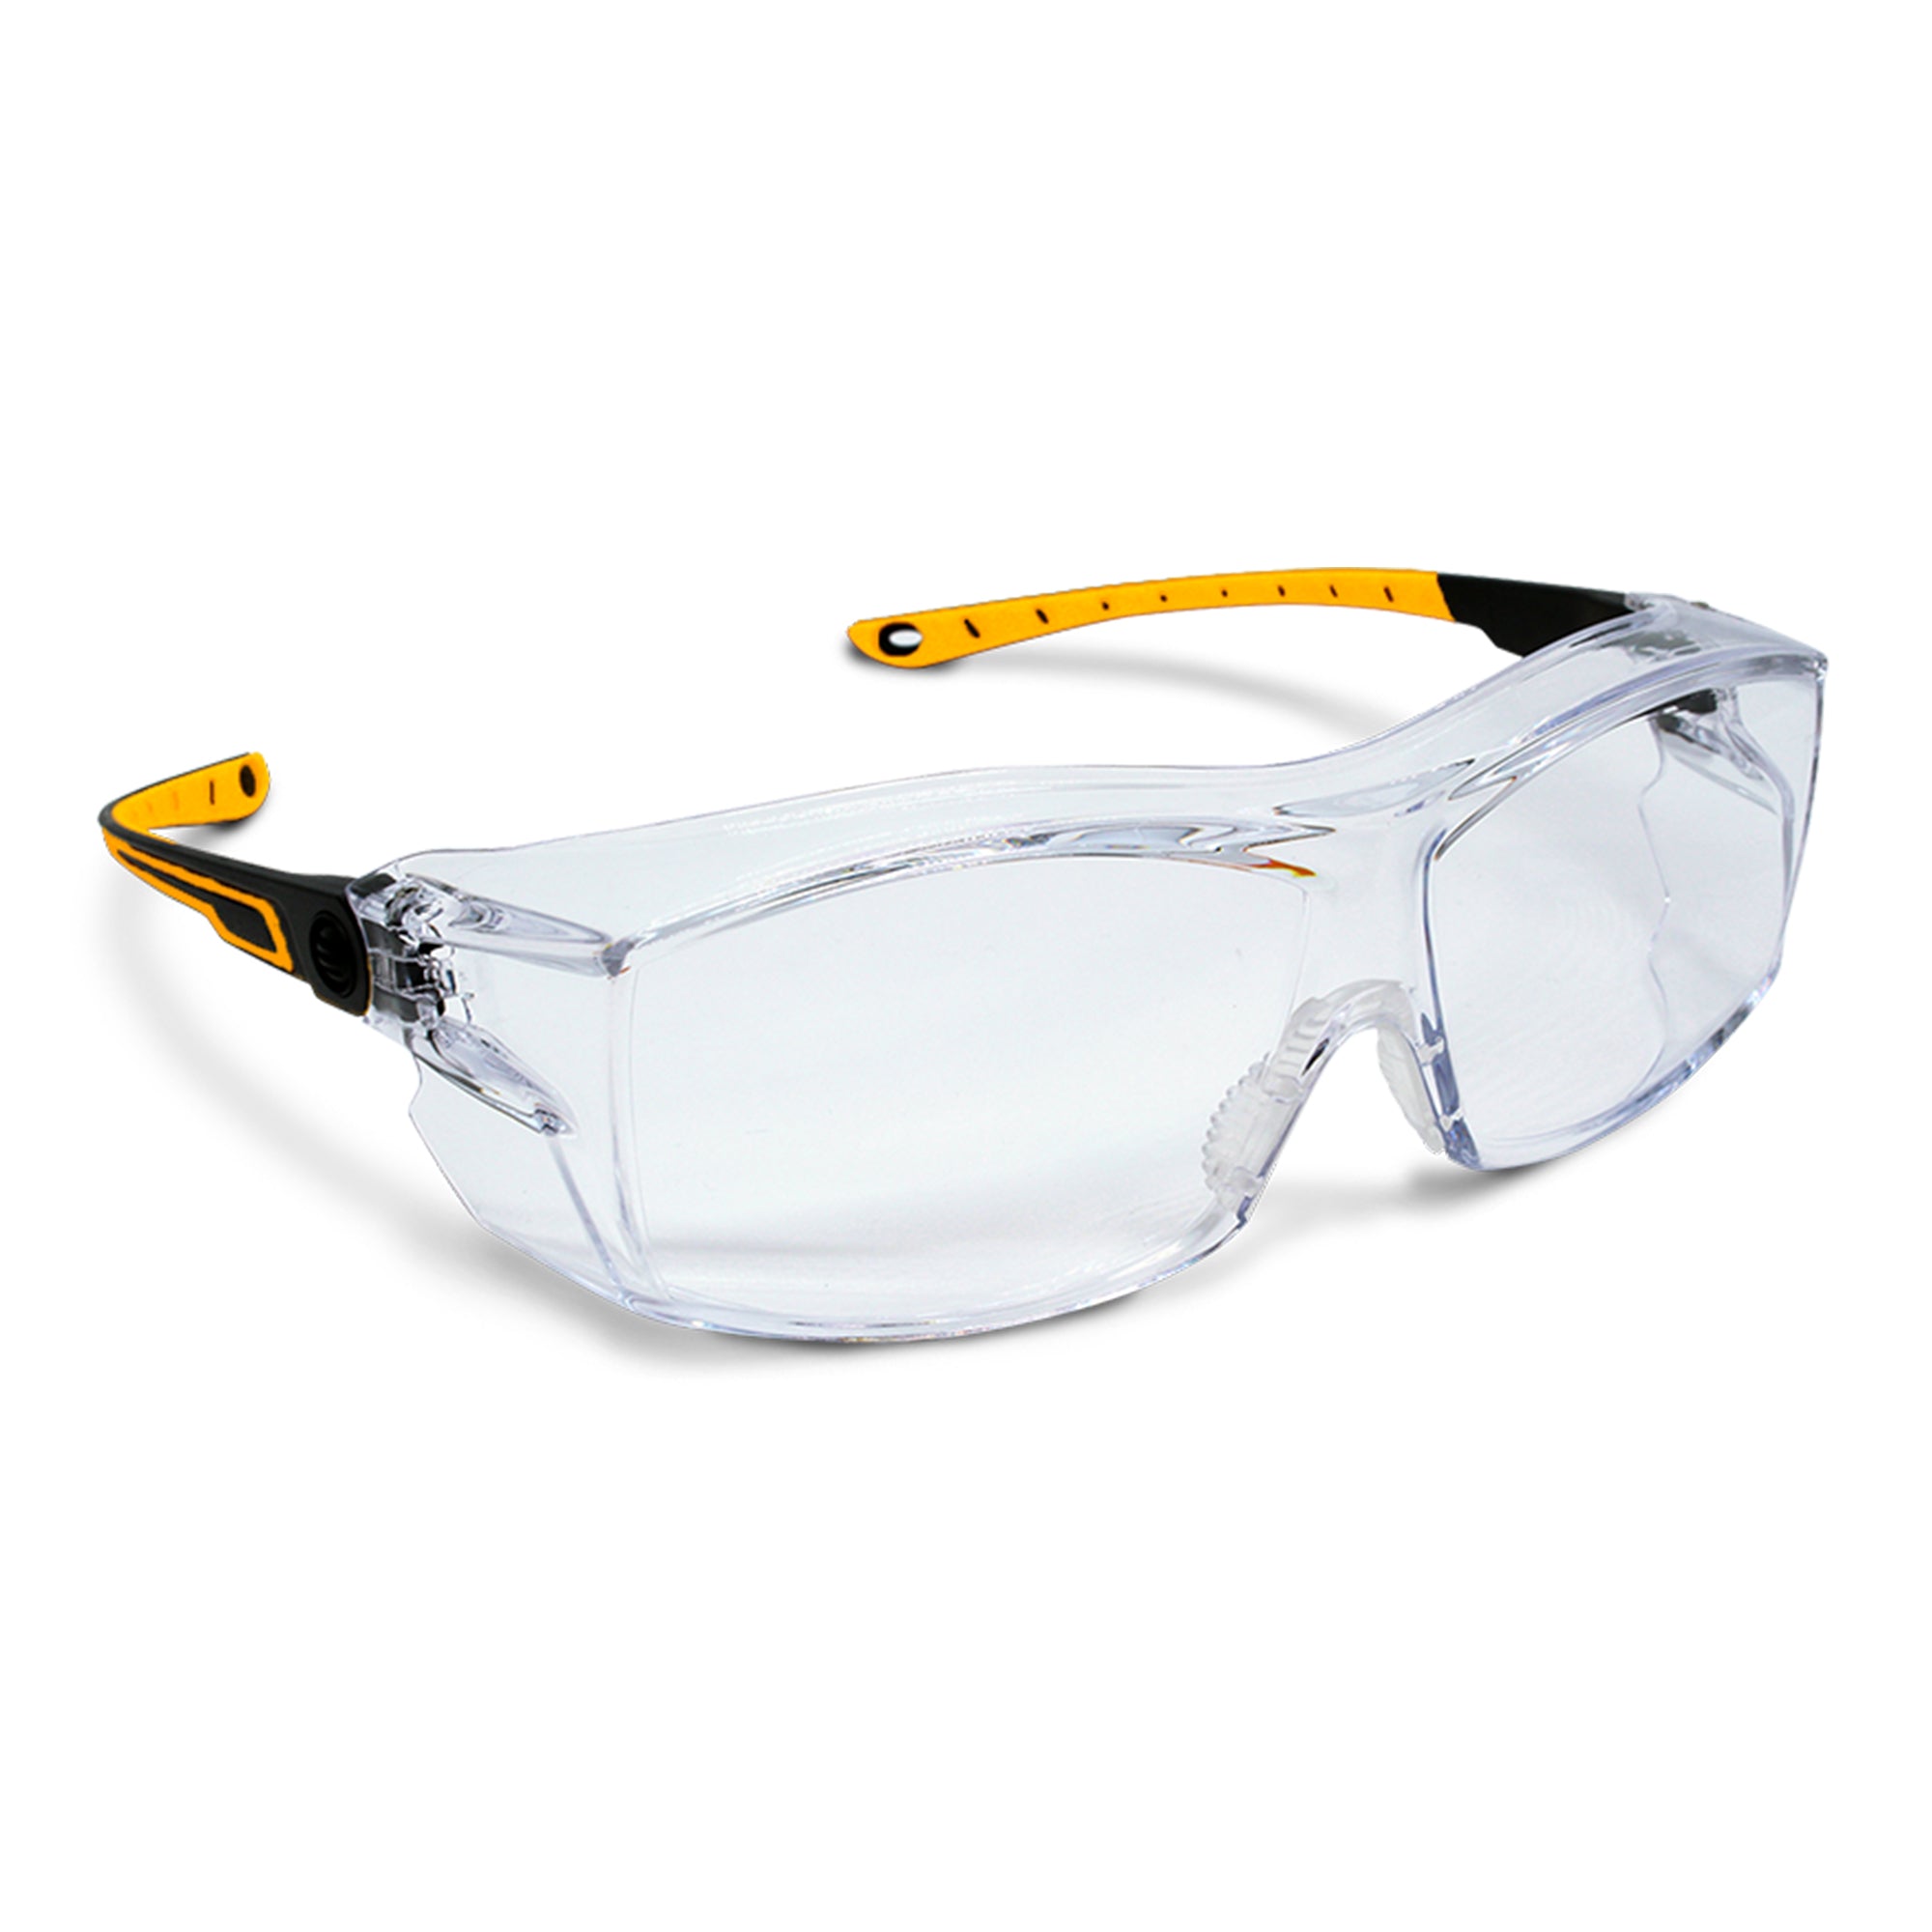 WORKHORSE® Clear OTG Safety Glasses with Anti-Scratch and Impact-Resistant Lens, Premium Anti-Fog and Ratchet Adjustable Temples to ensure a perfect fit